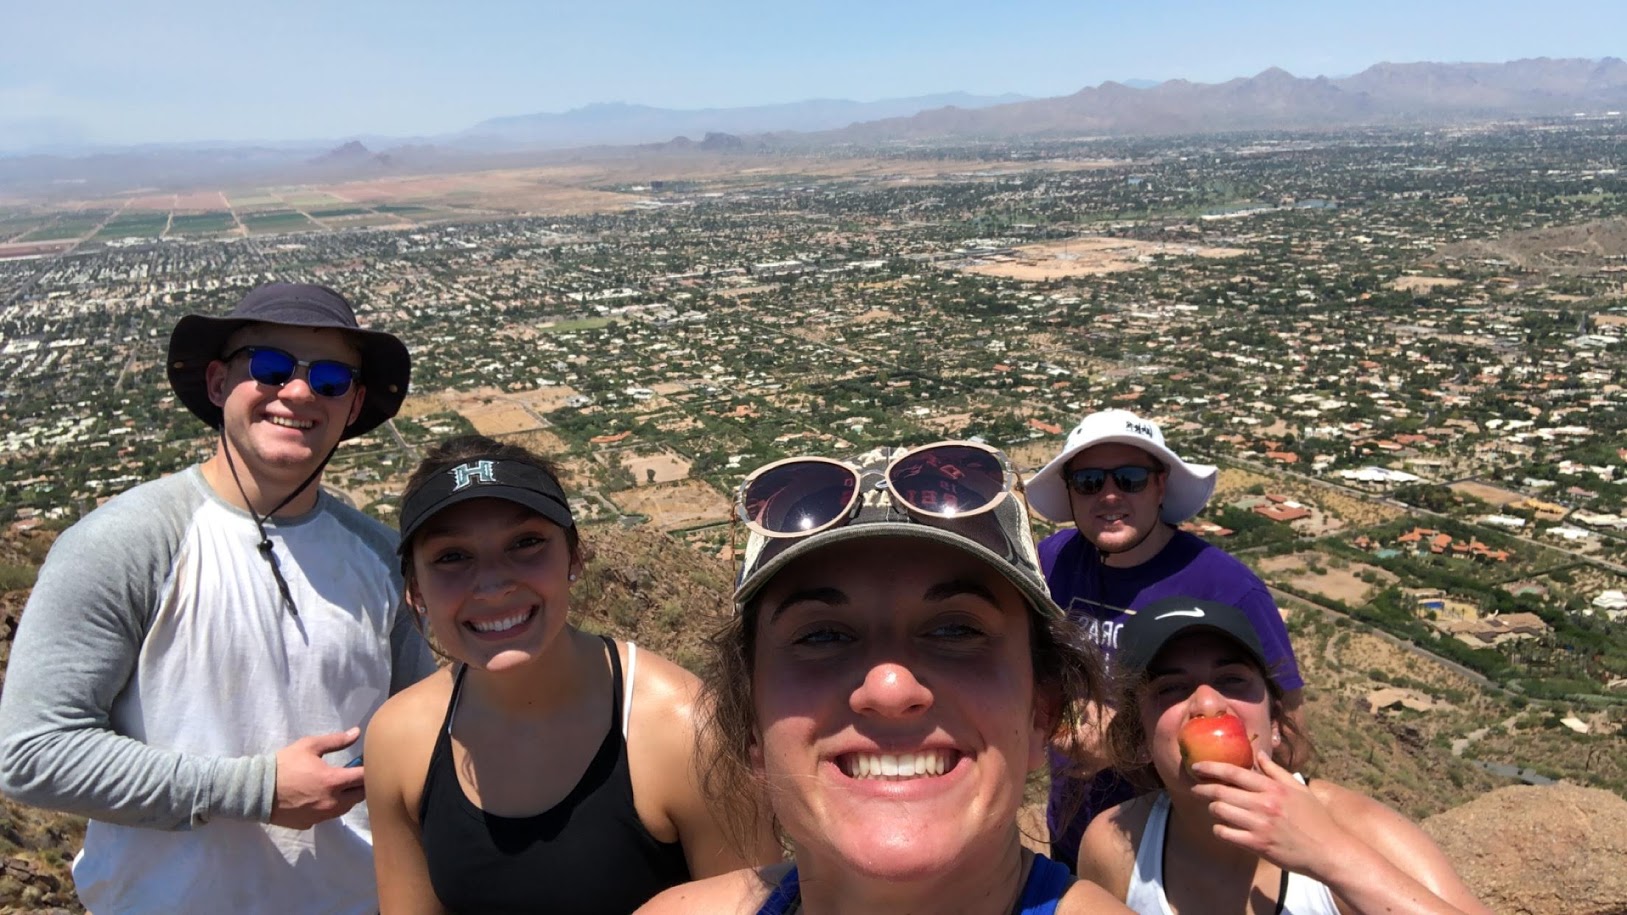 Here is a picture of Zach, Madison, myself, Ellie, and Craig hiking Camelbak Mountain in Arizona.